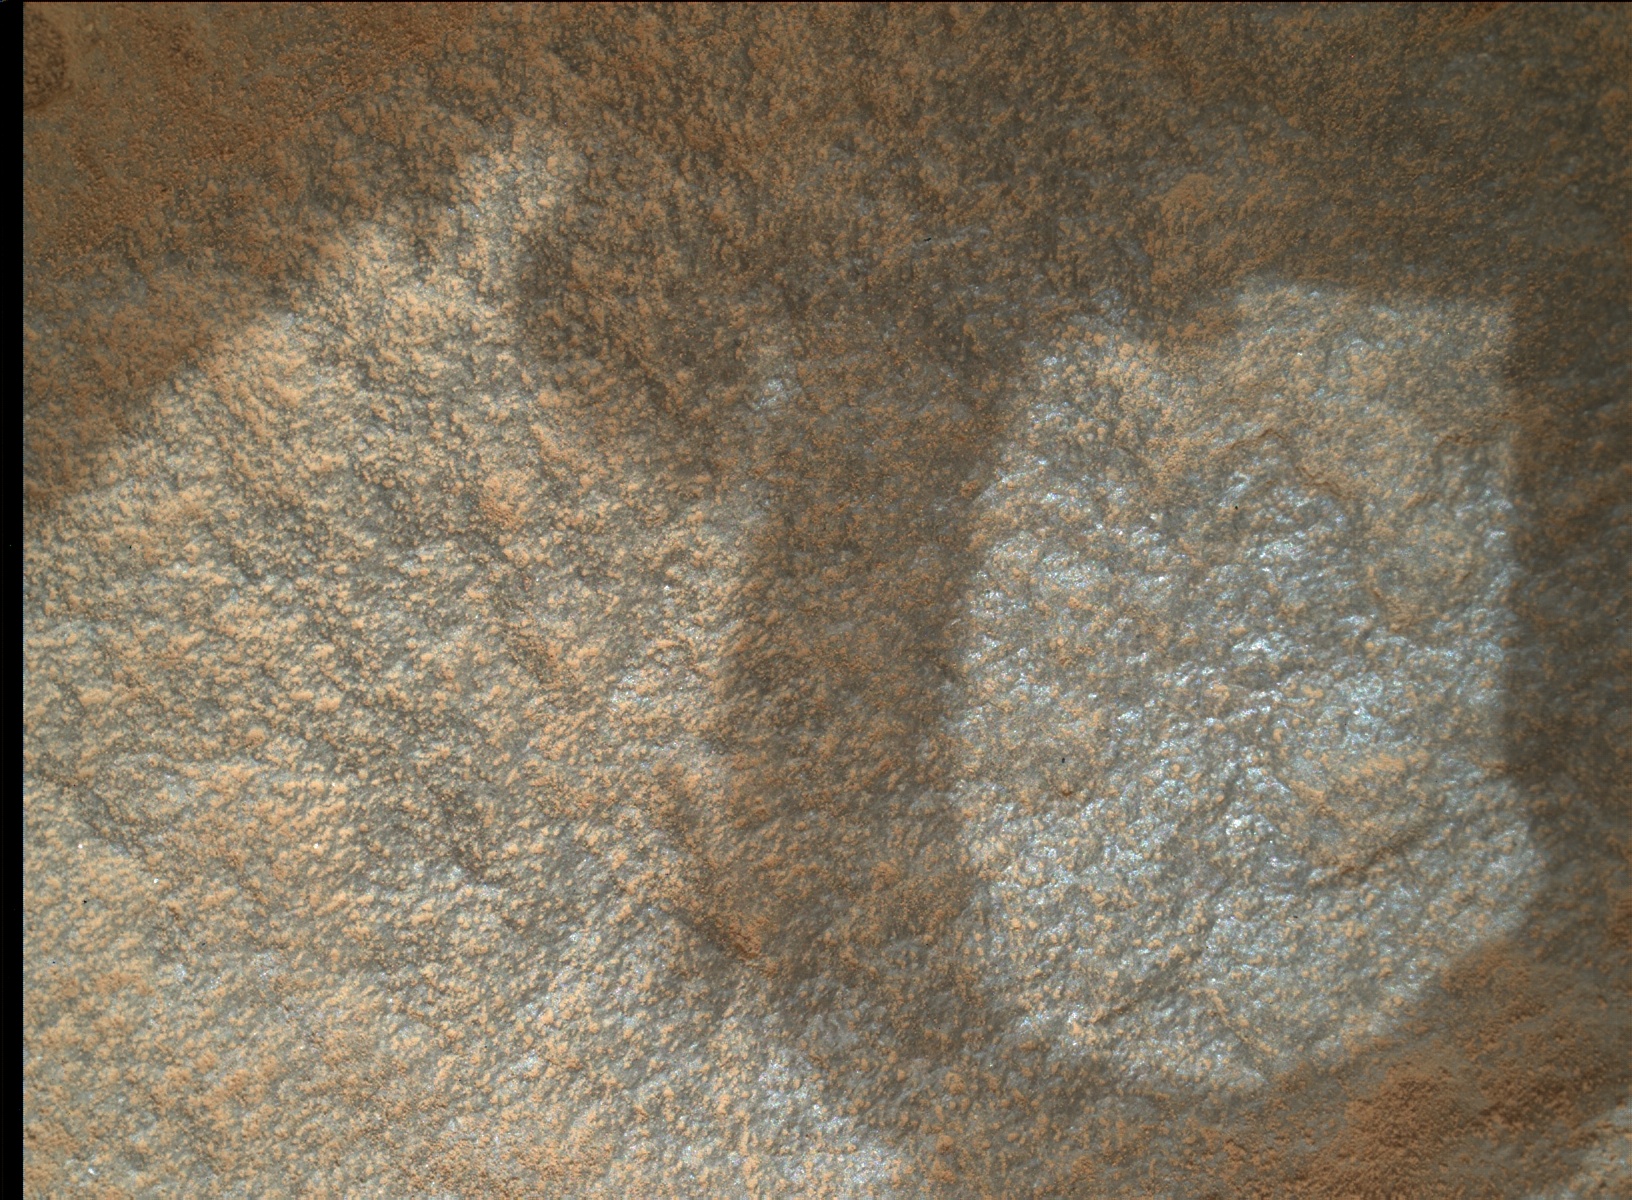 Nasa's Mars rover Curiosity acquired this image using its Mars Hand Lens Imager (MAHLI) on Sol 975